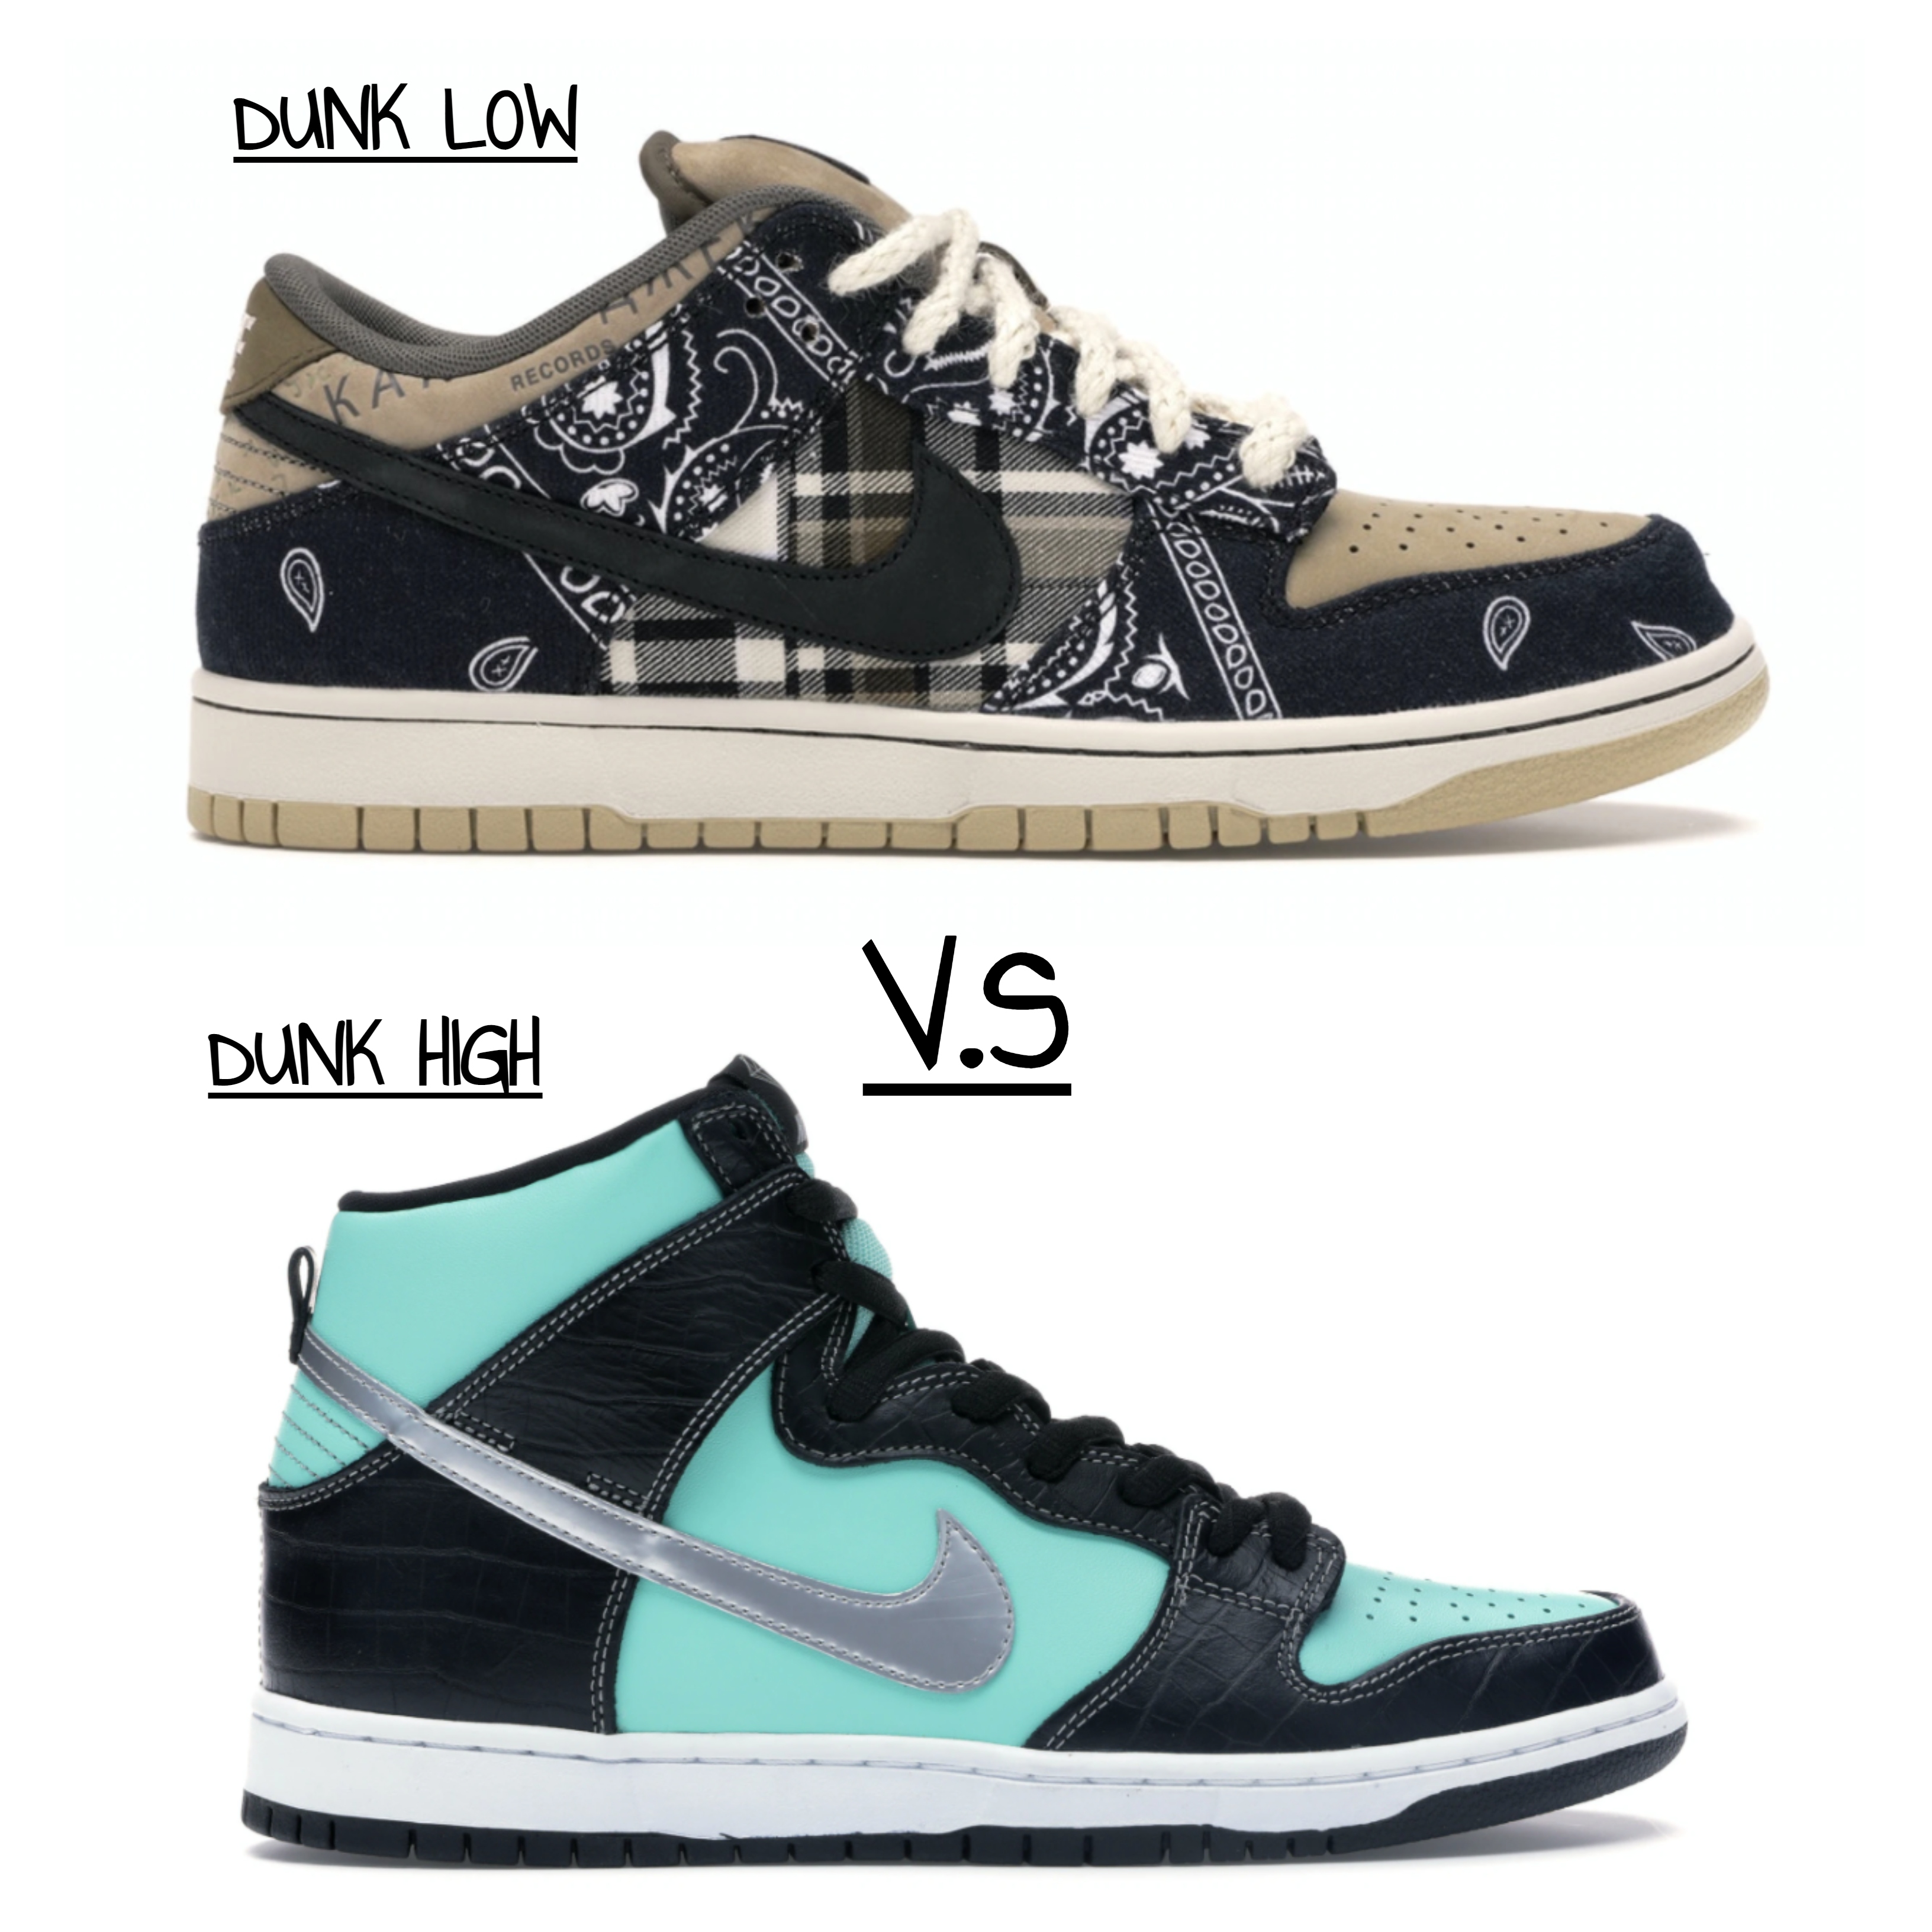 Nike SB Dunks low vs highs and what you need to know